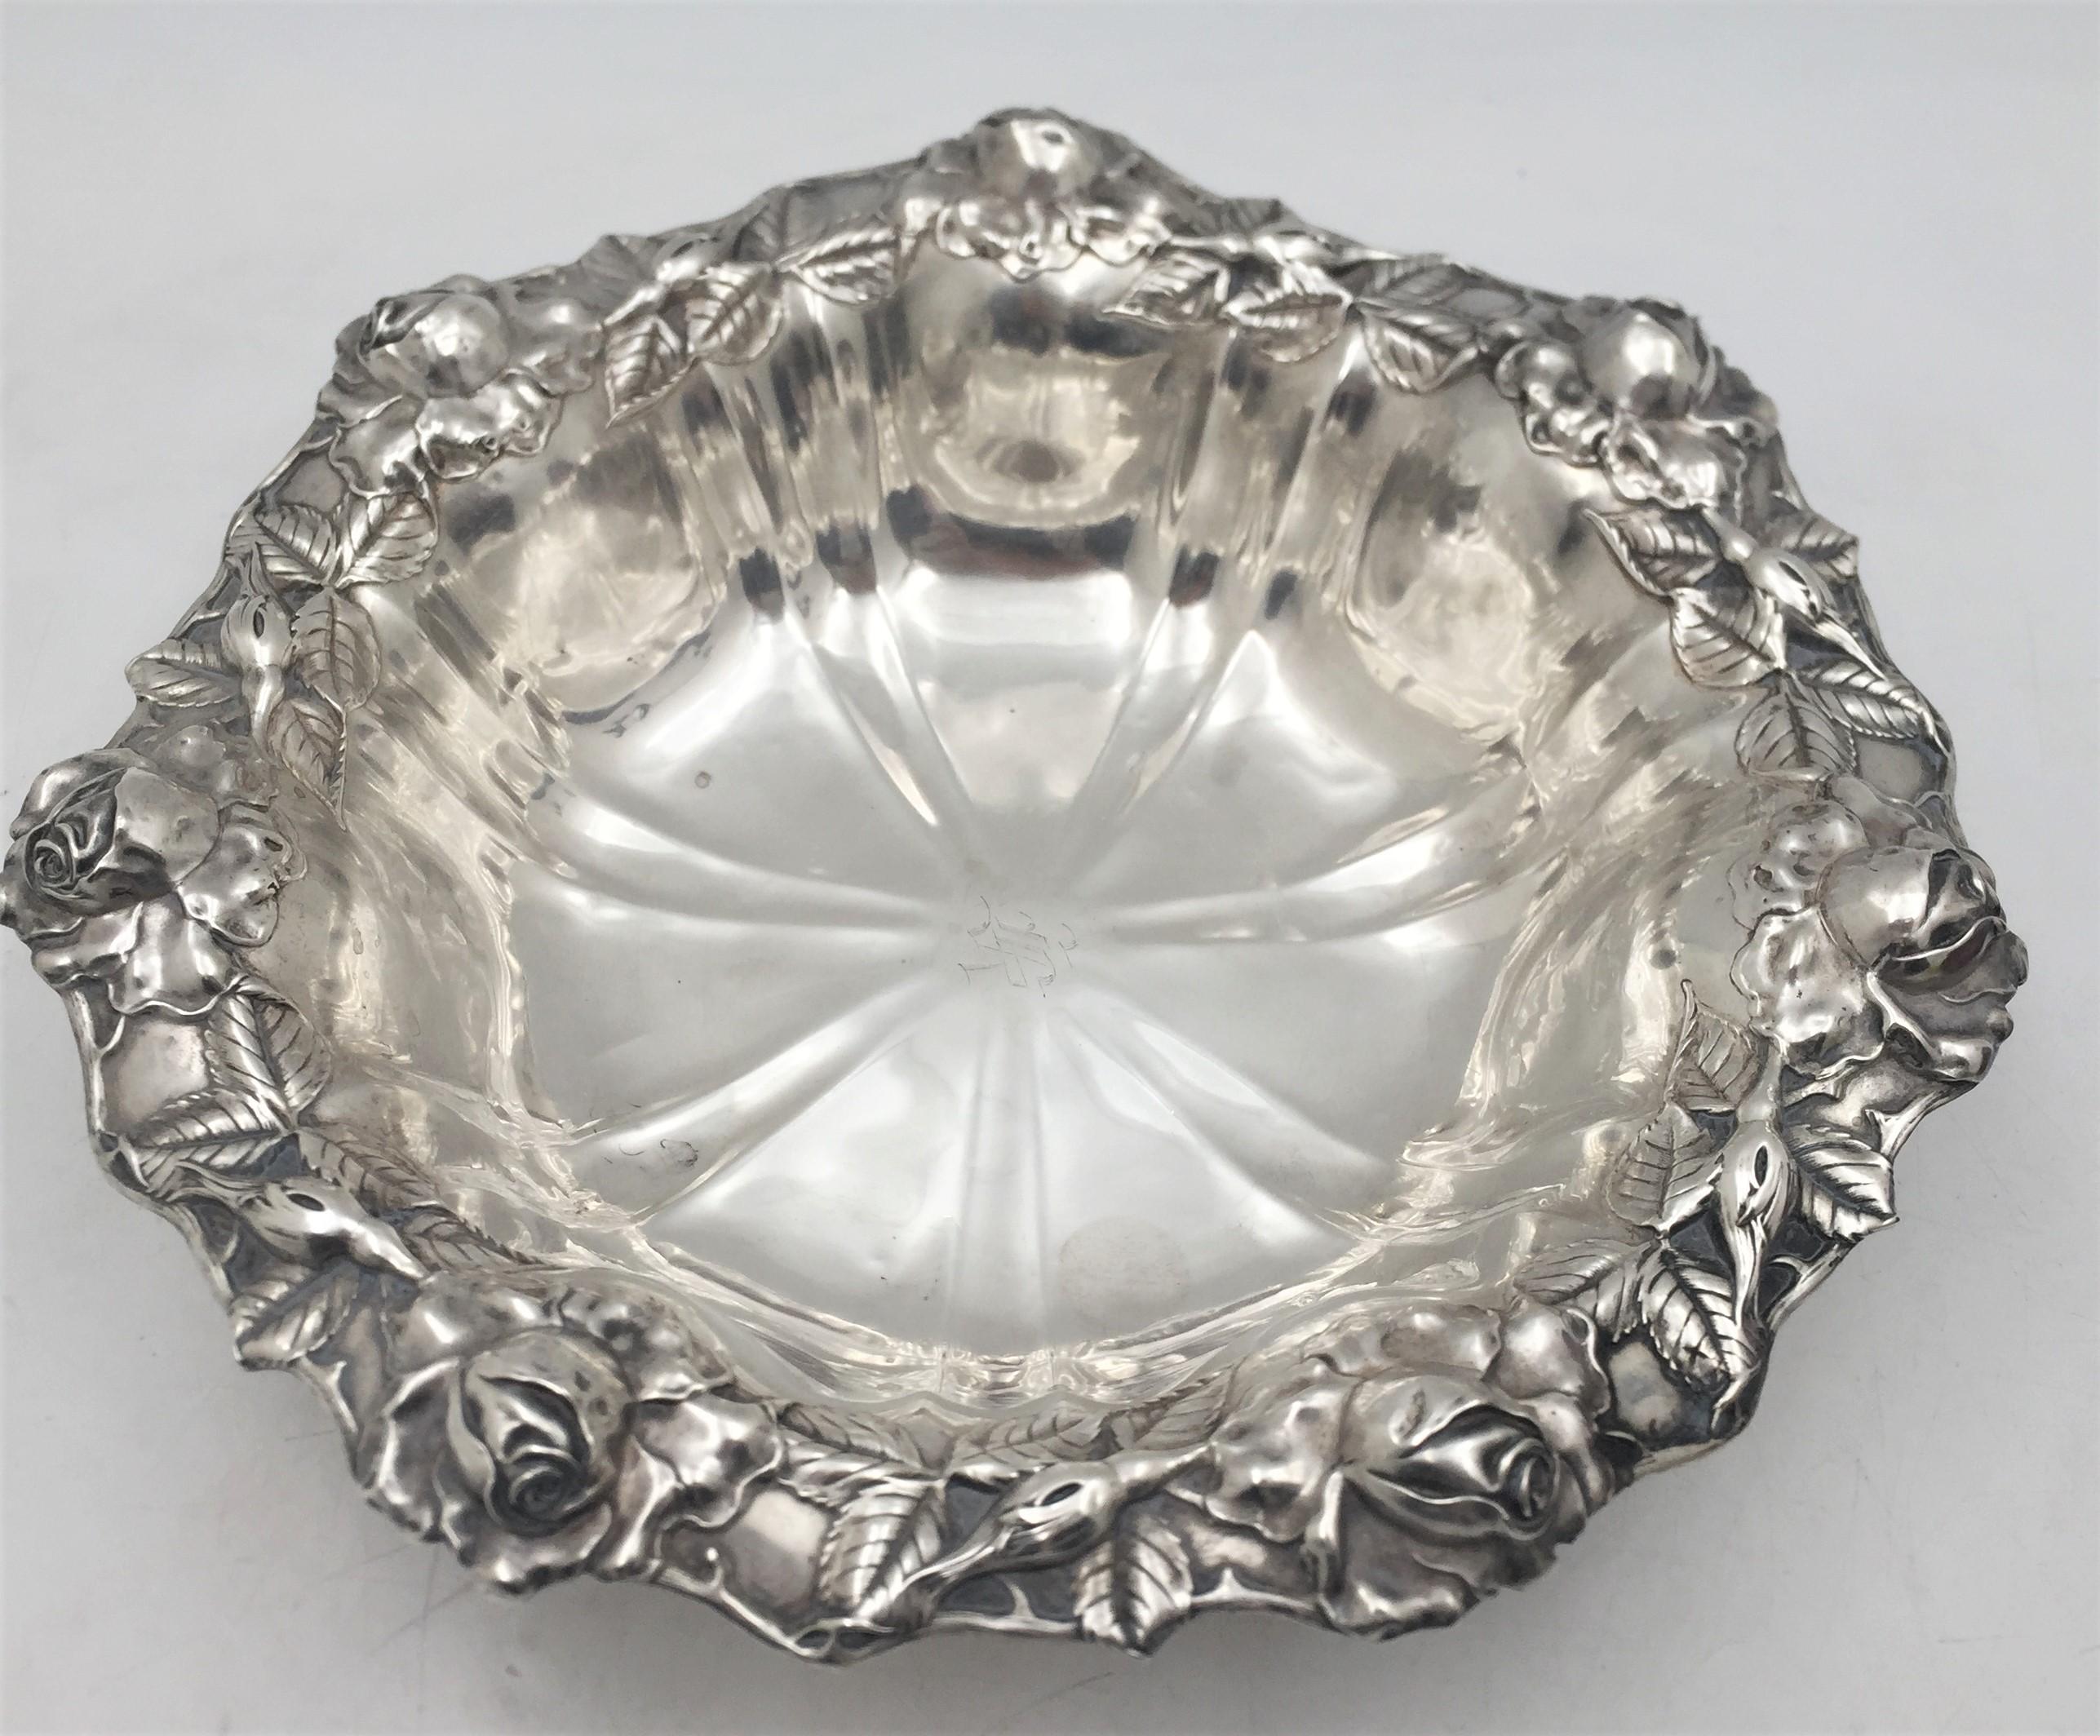 Unger Brothers, sterling silver bowl in Art Nouveau style with a rim richly adorned with tri-dimensional natural motifs including sculptural roses. It measures 10 1/4'' in diameter by 2 7/8'' in height, weighs 10.3 troy ounces, and bears hallmarks